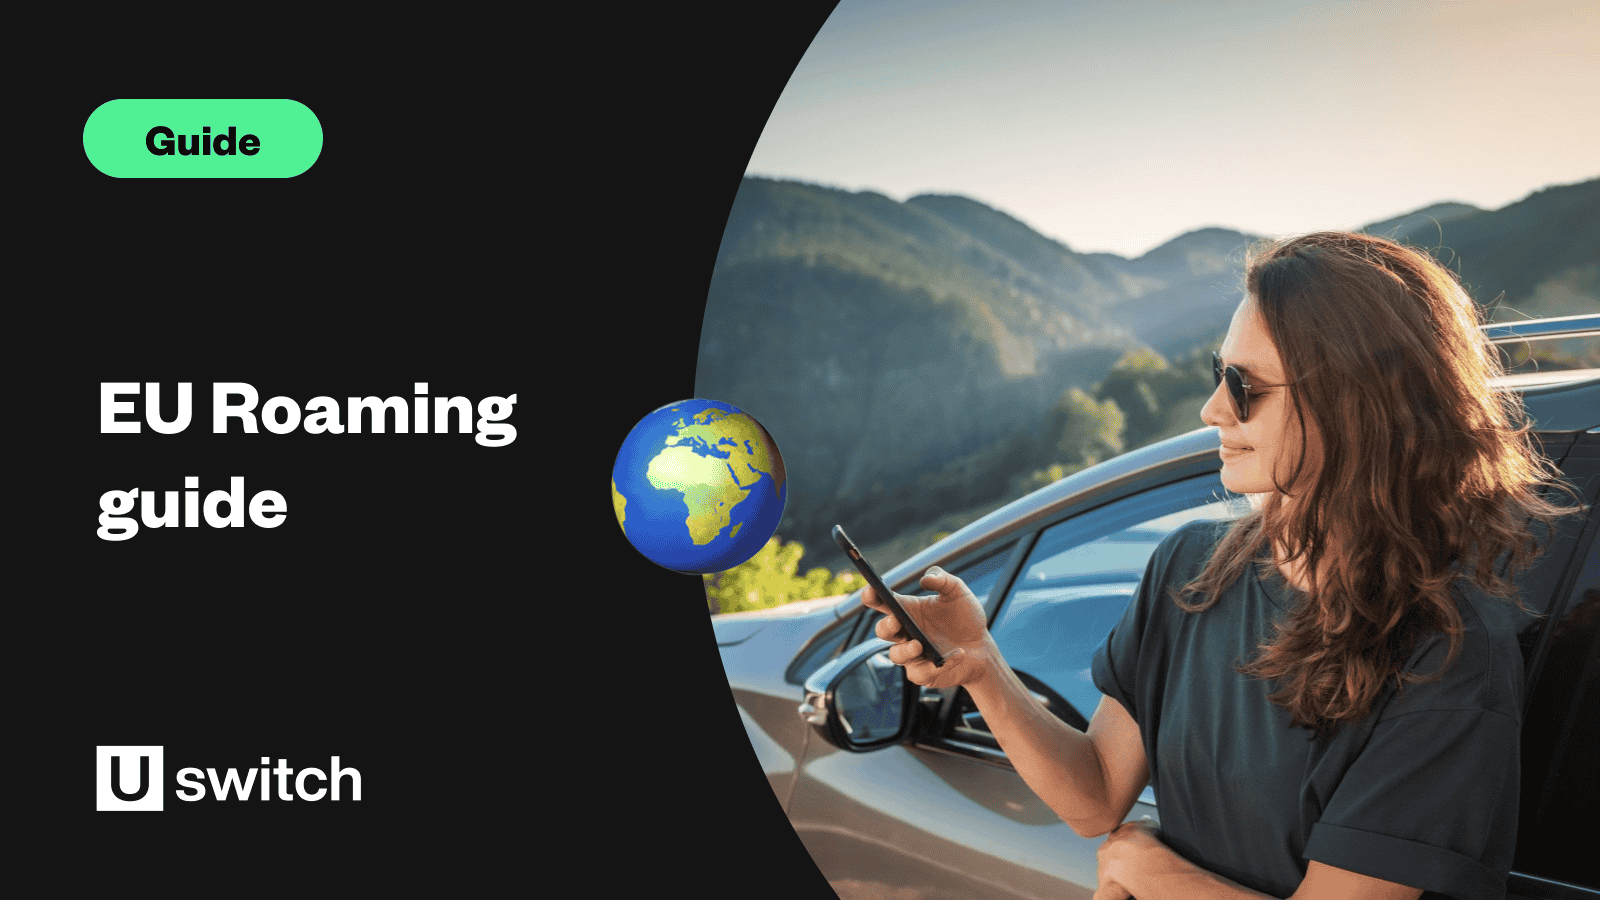 EU roaming guide - Young woman travelling by car in the mountains using smartphone